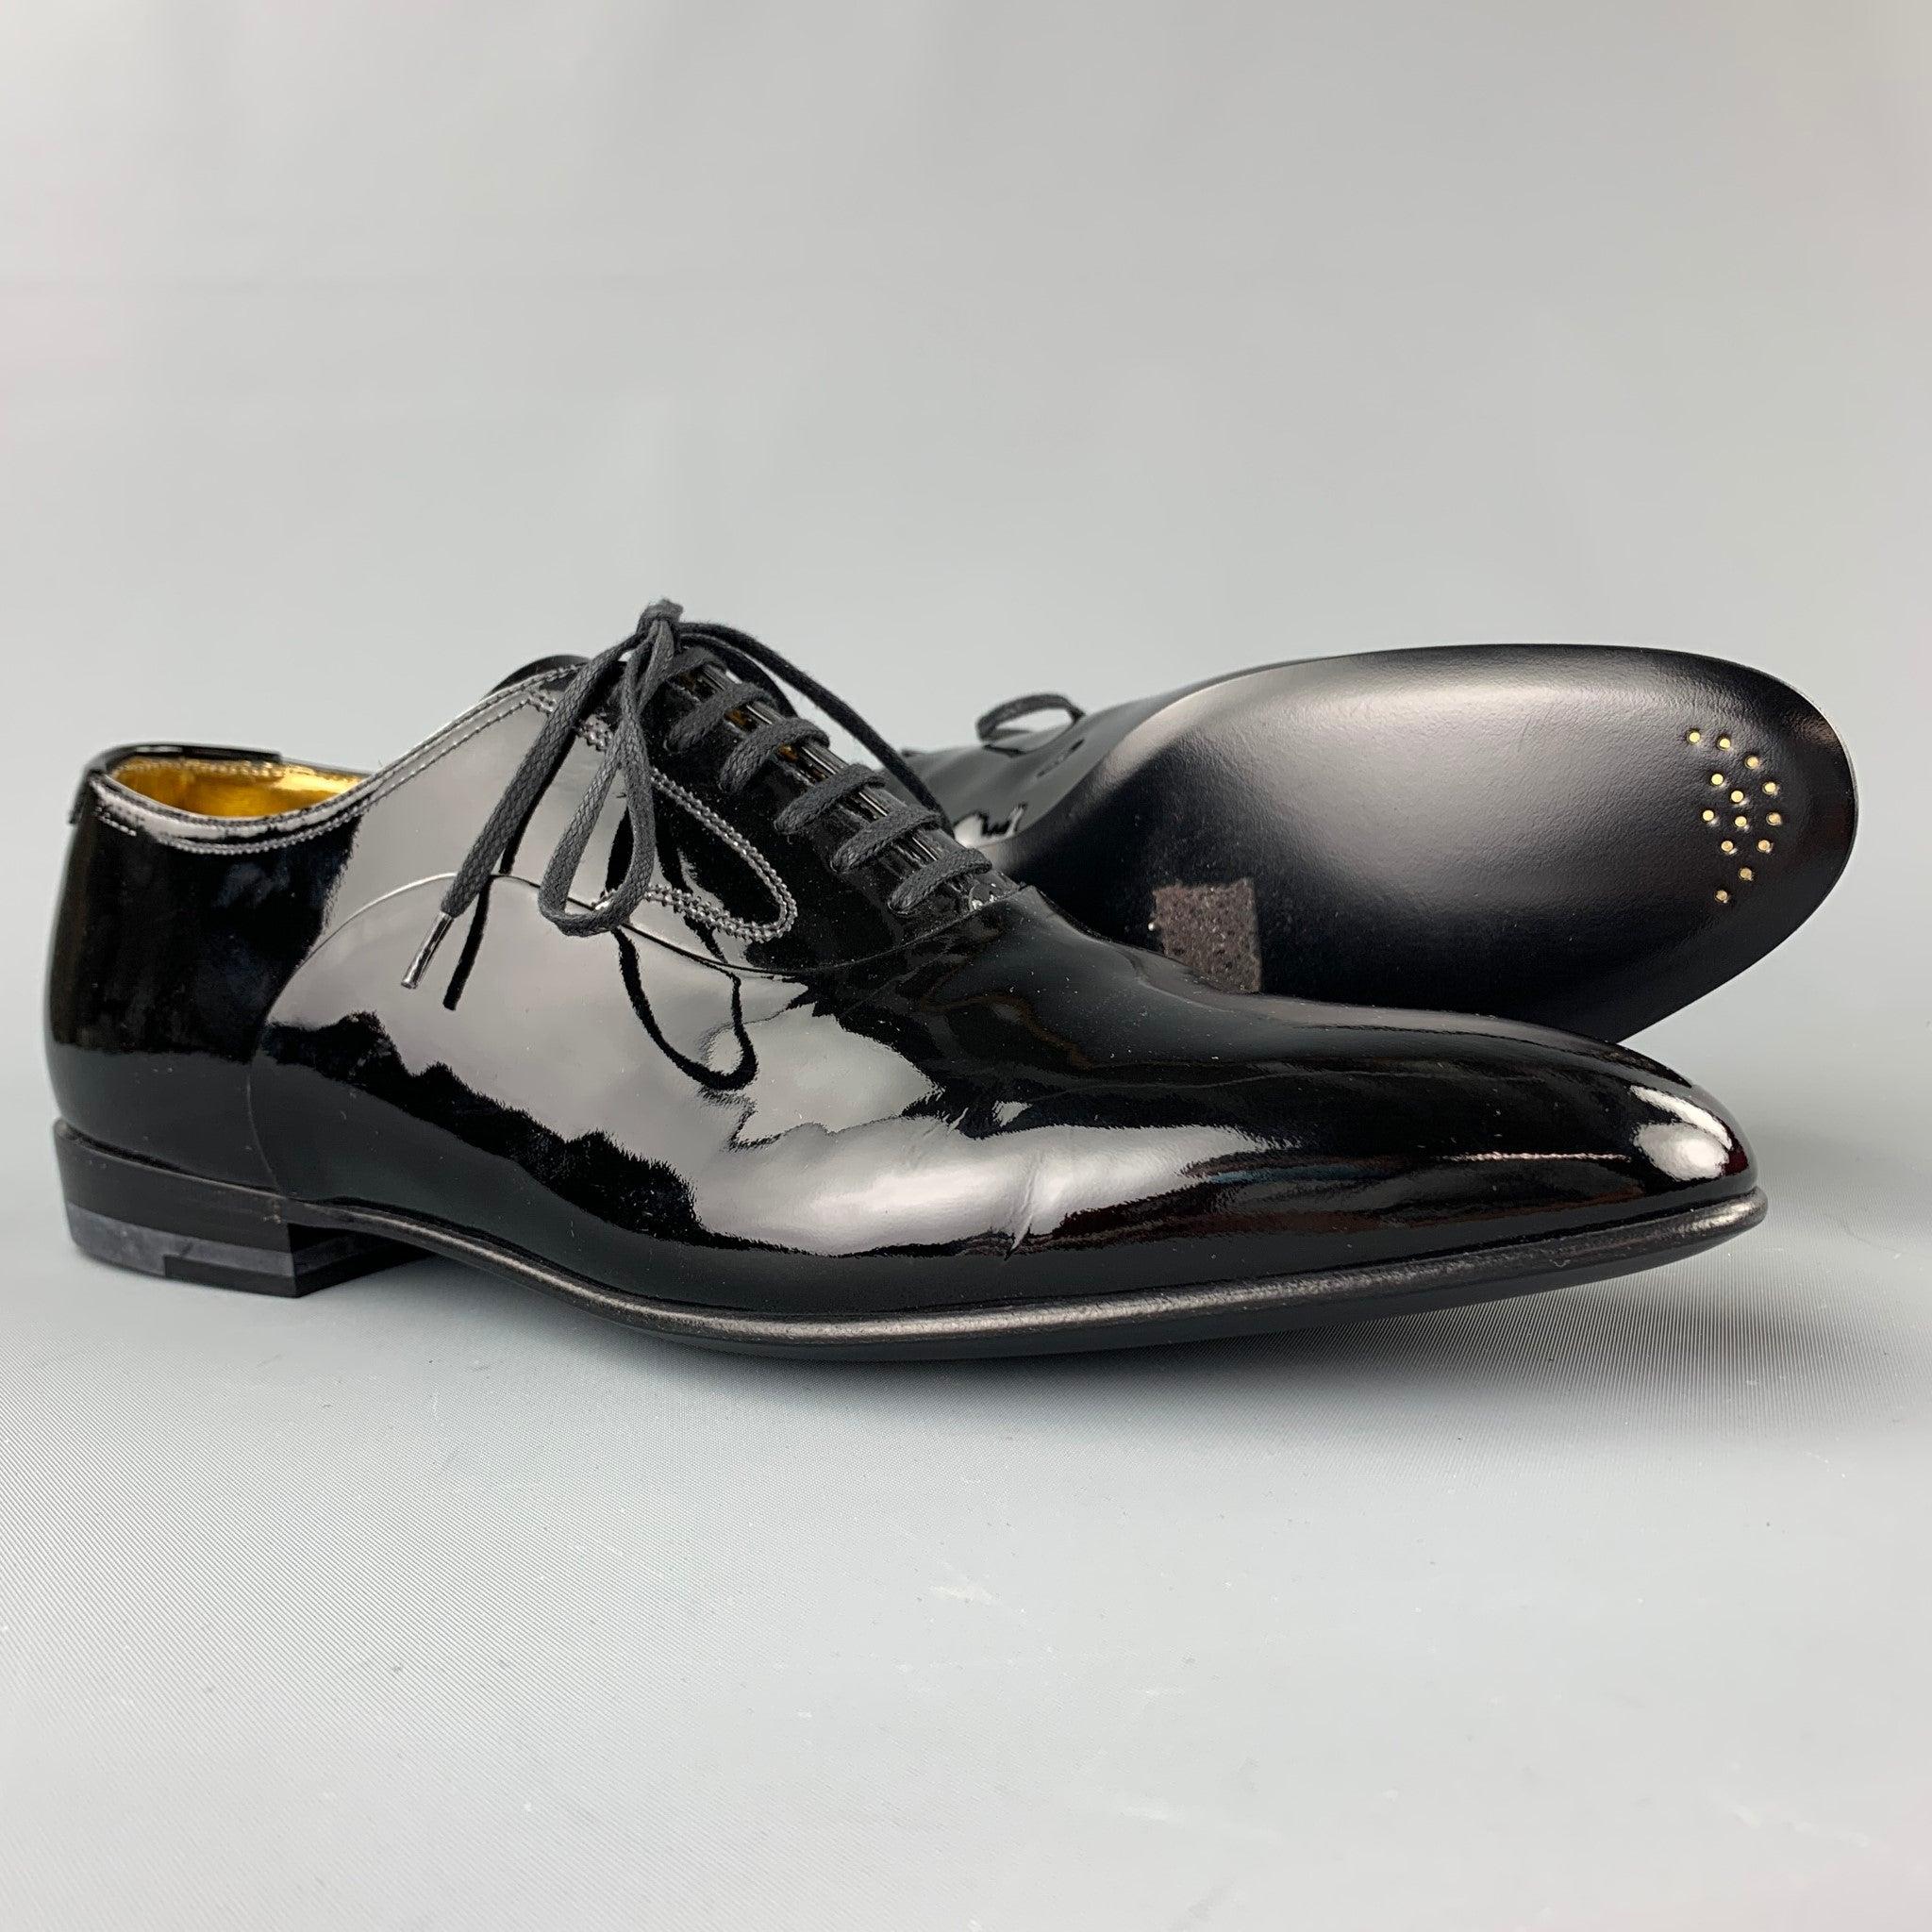 BALLY Garrett Size 8 Black Patent Leather Lace Up Shoes In Good Condition For Sale In San Francisco, CA